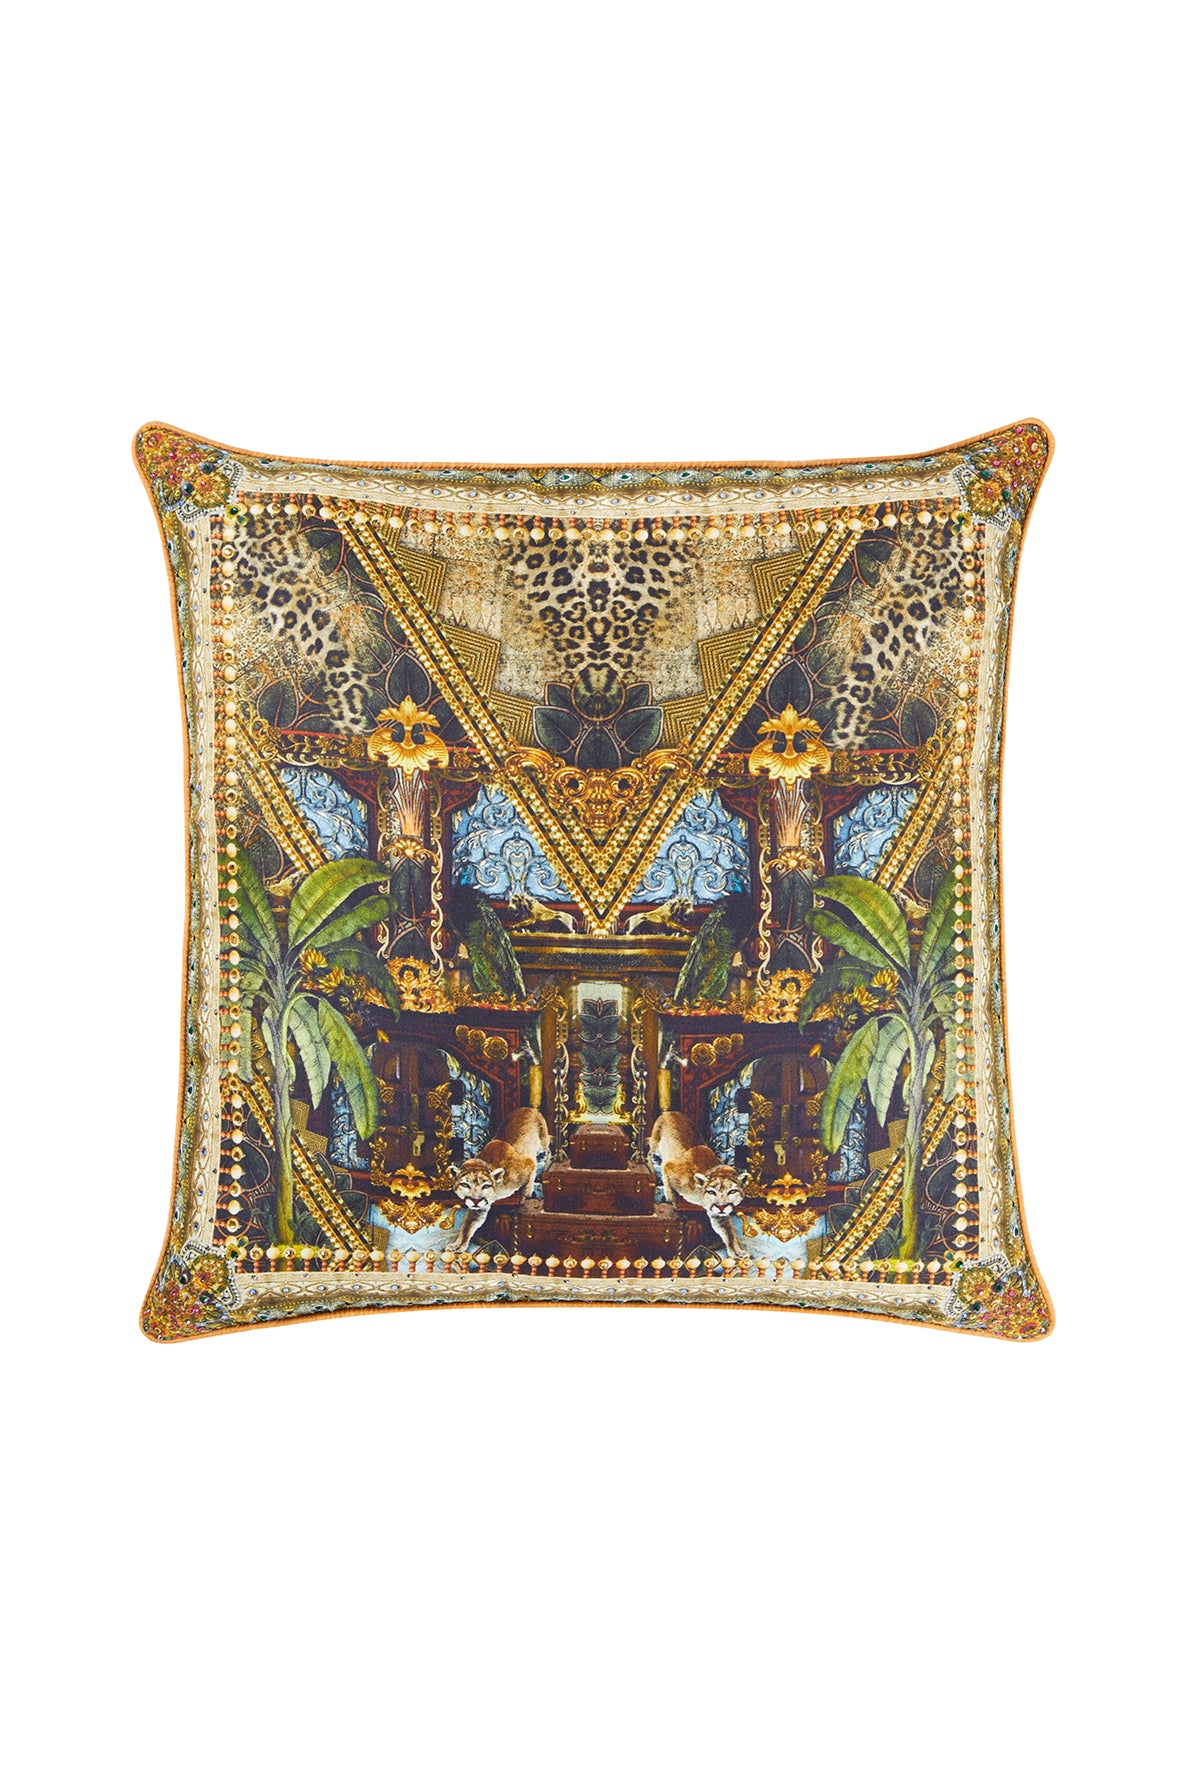 THE GYPSY LOUNGE LARGE SQUARE CUSHION